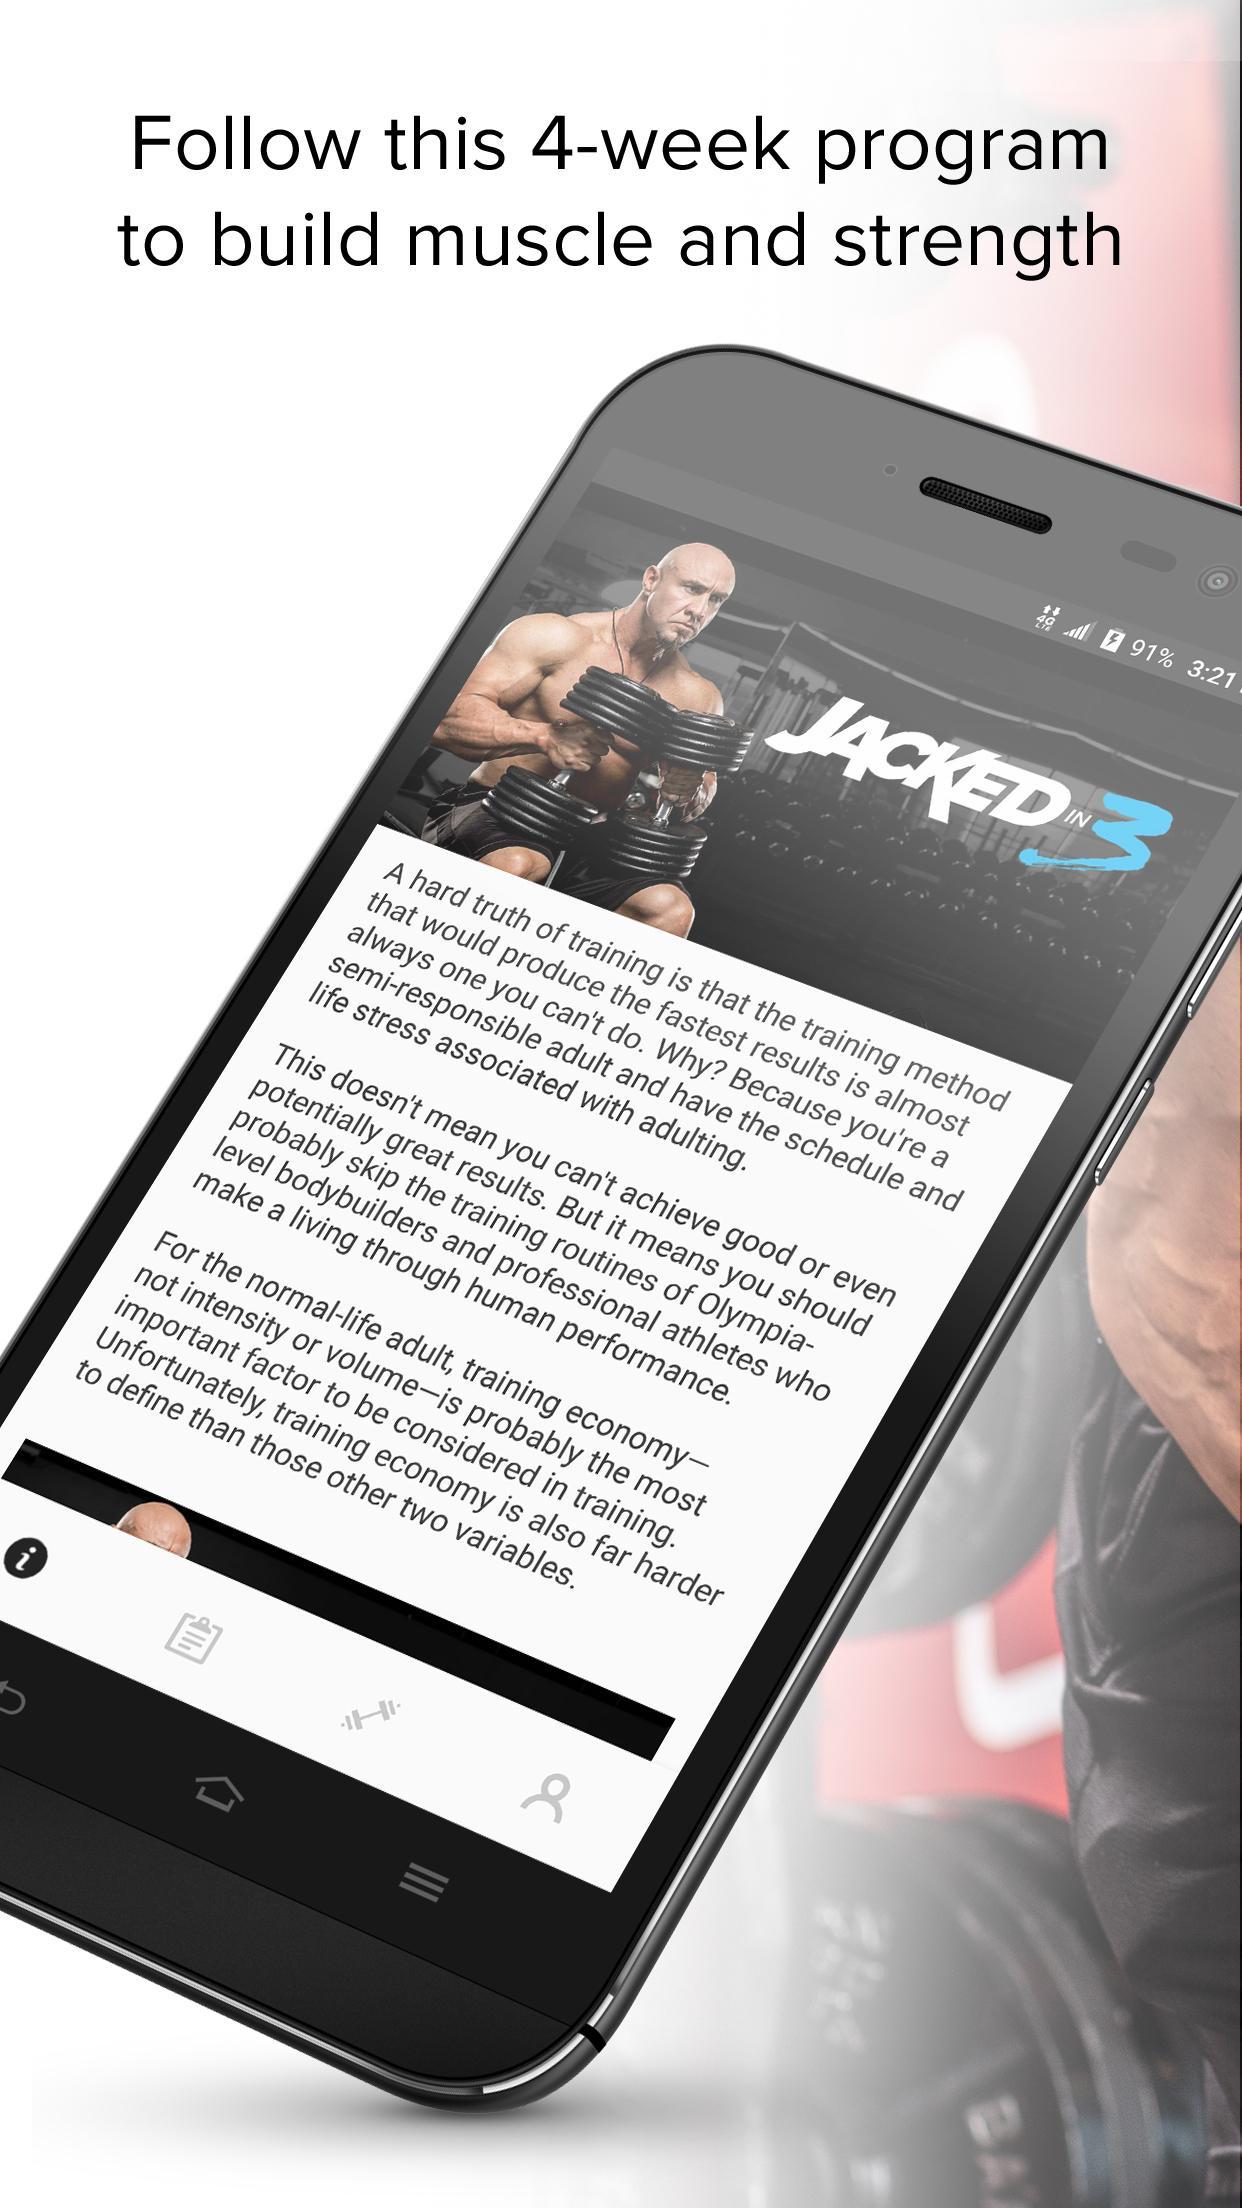 Paul Carter's Jacked in 3 for Android - APK Download